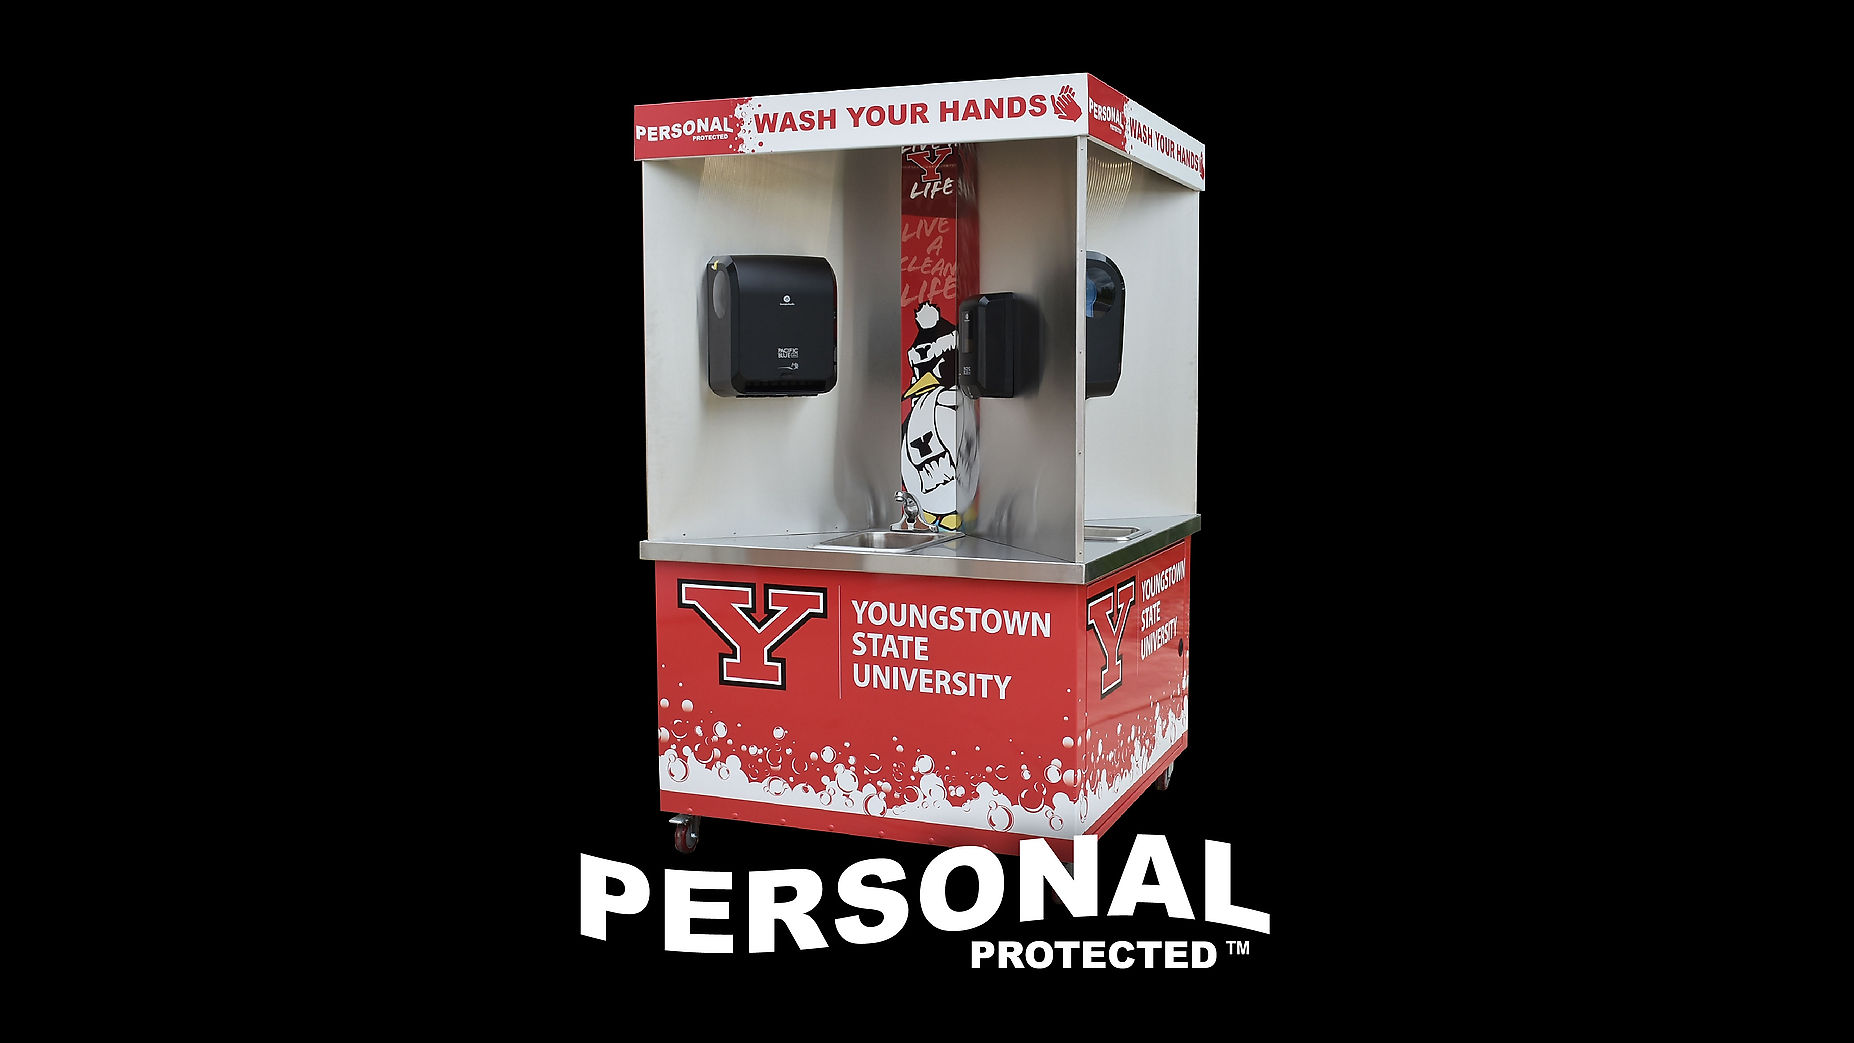 PERSONAL PROTECTED™ 2020 YSU COMMERCIAL